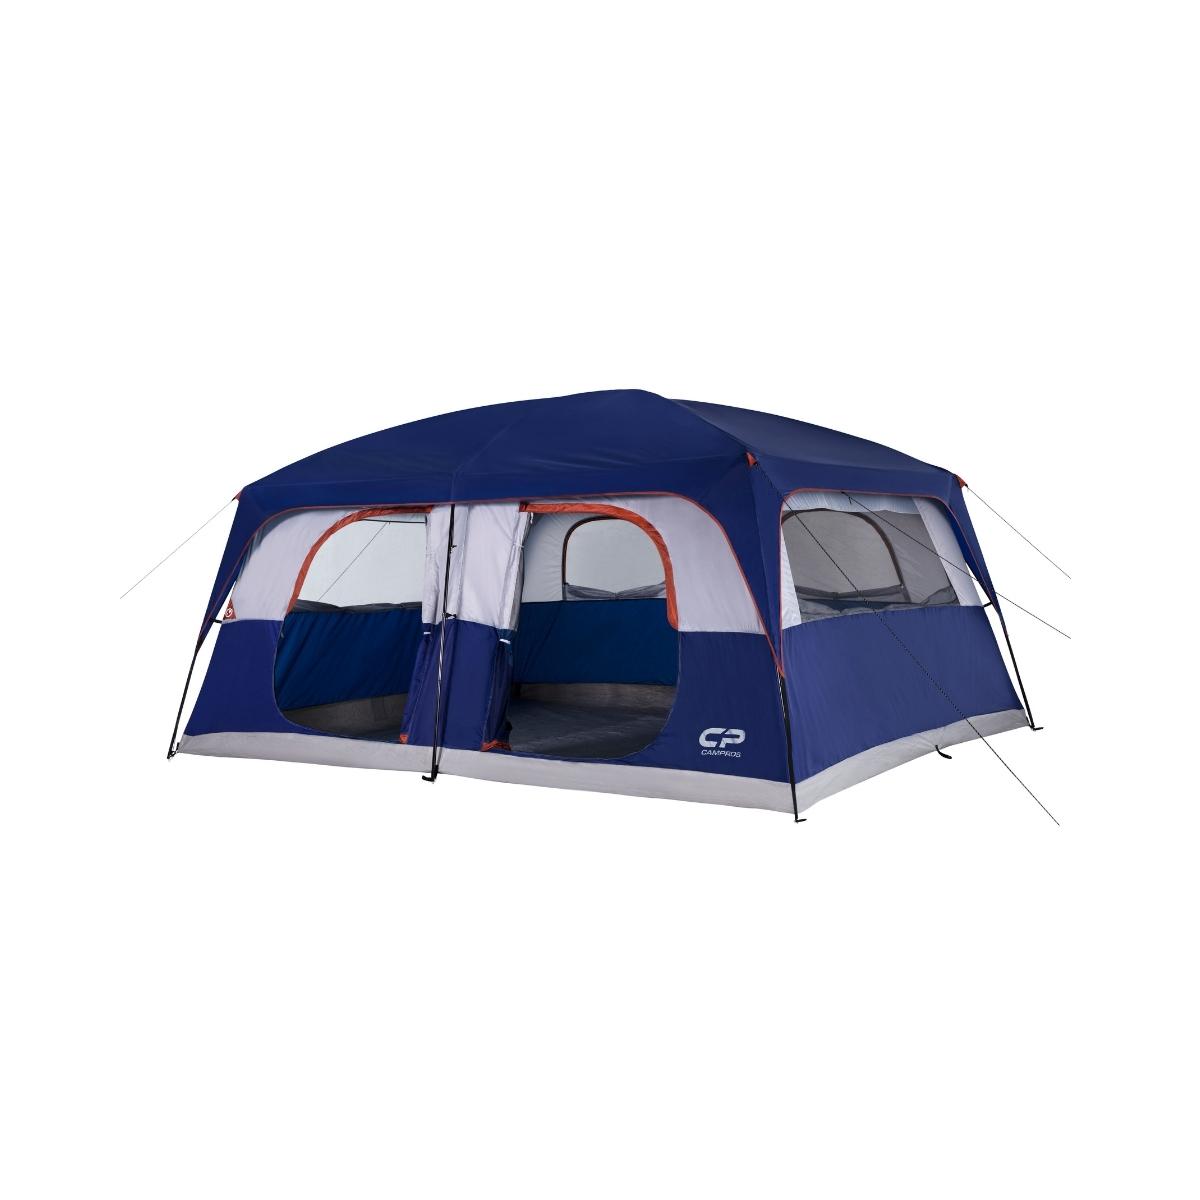 CAMPROS 12 Person Family Camping Tent NEW (3 Rooms)-Camping Tents-Campros Tent